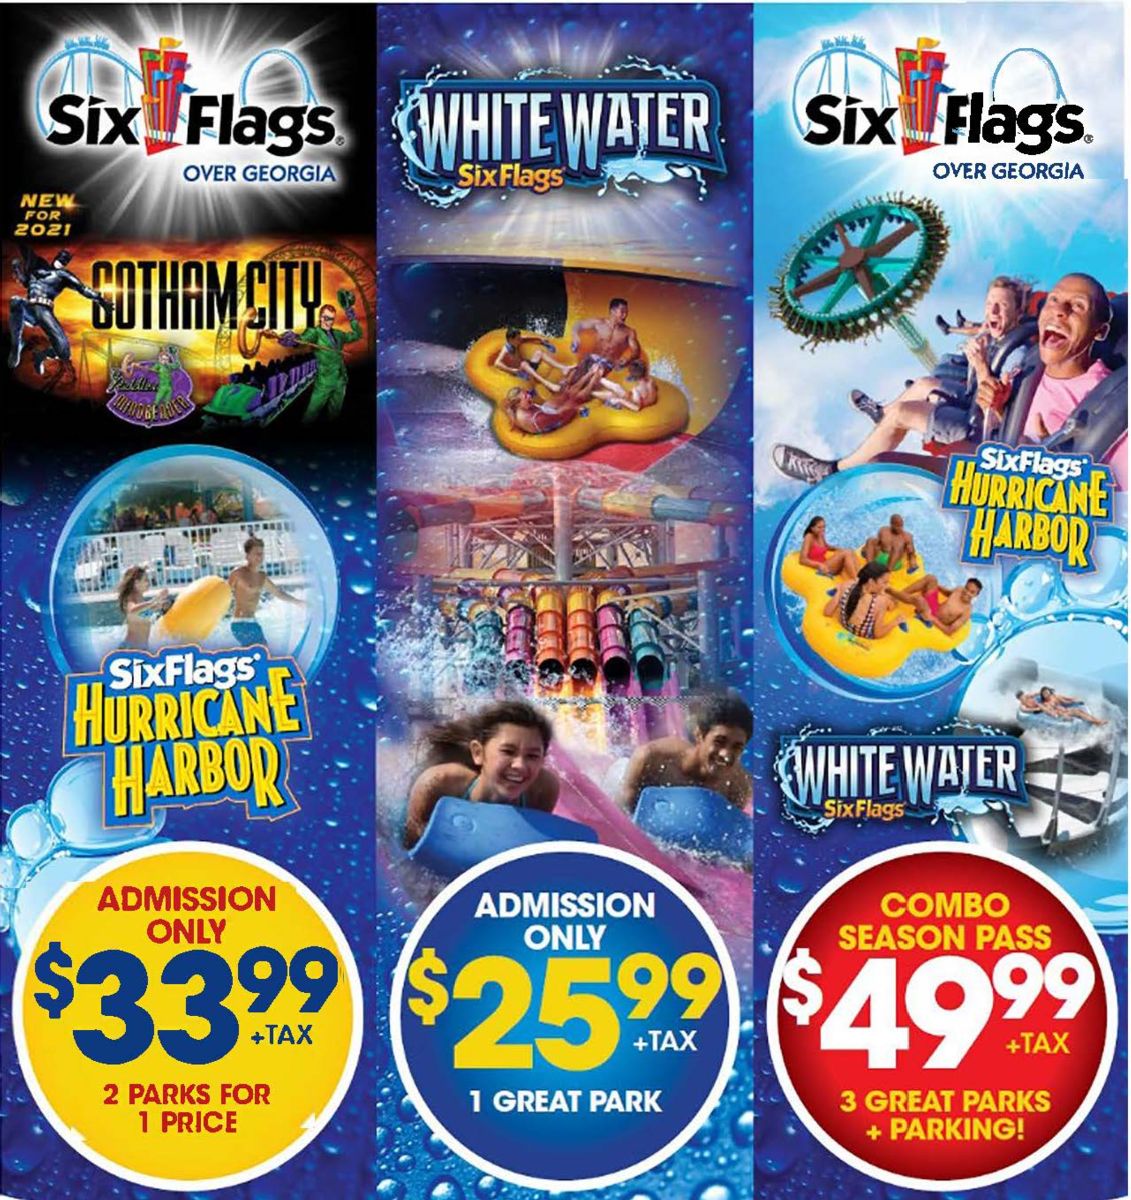 Six Flags White Water Discount Tickets / Choose Your Own Adventure